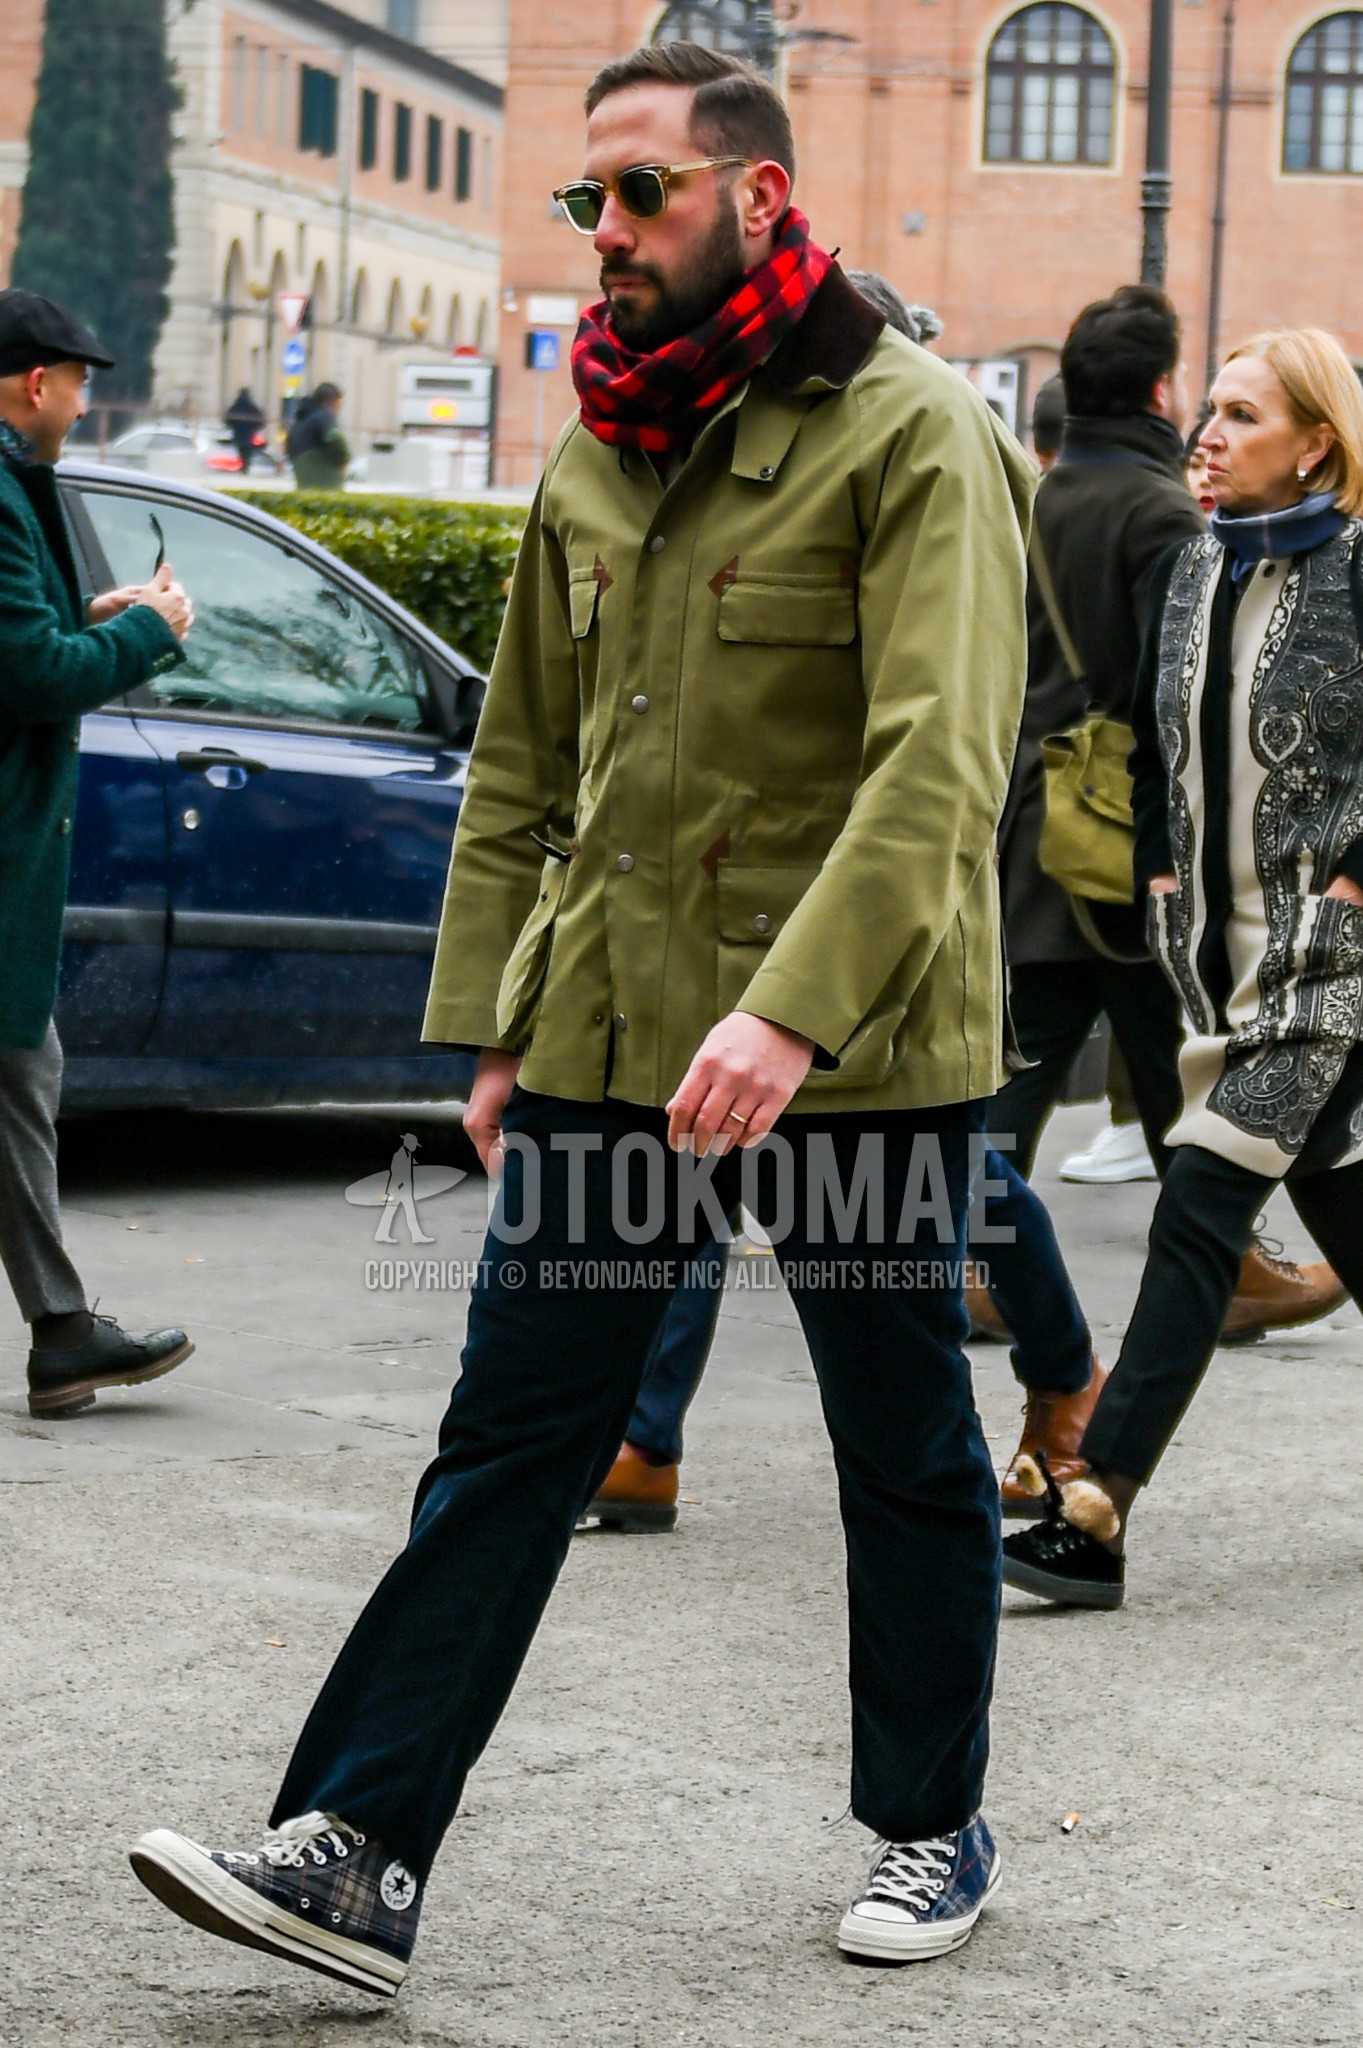 Men's autumn winter outfit with clear plain sunglasses, red black check scarf, olive green plain field jacket/hunting jacket, navy plain winter pants (corduroy,velour), navy high-cut sneakers.